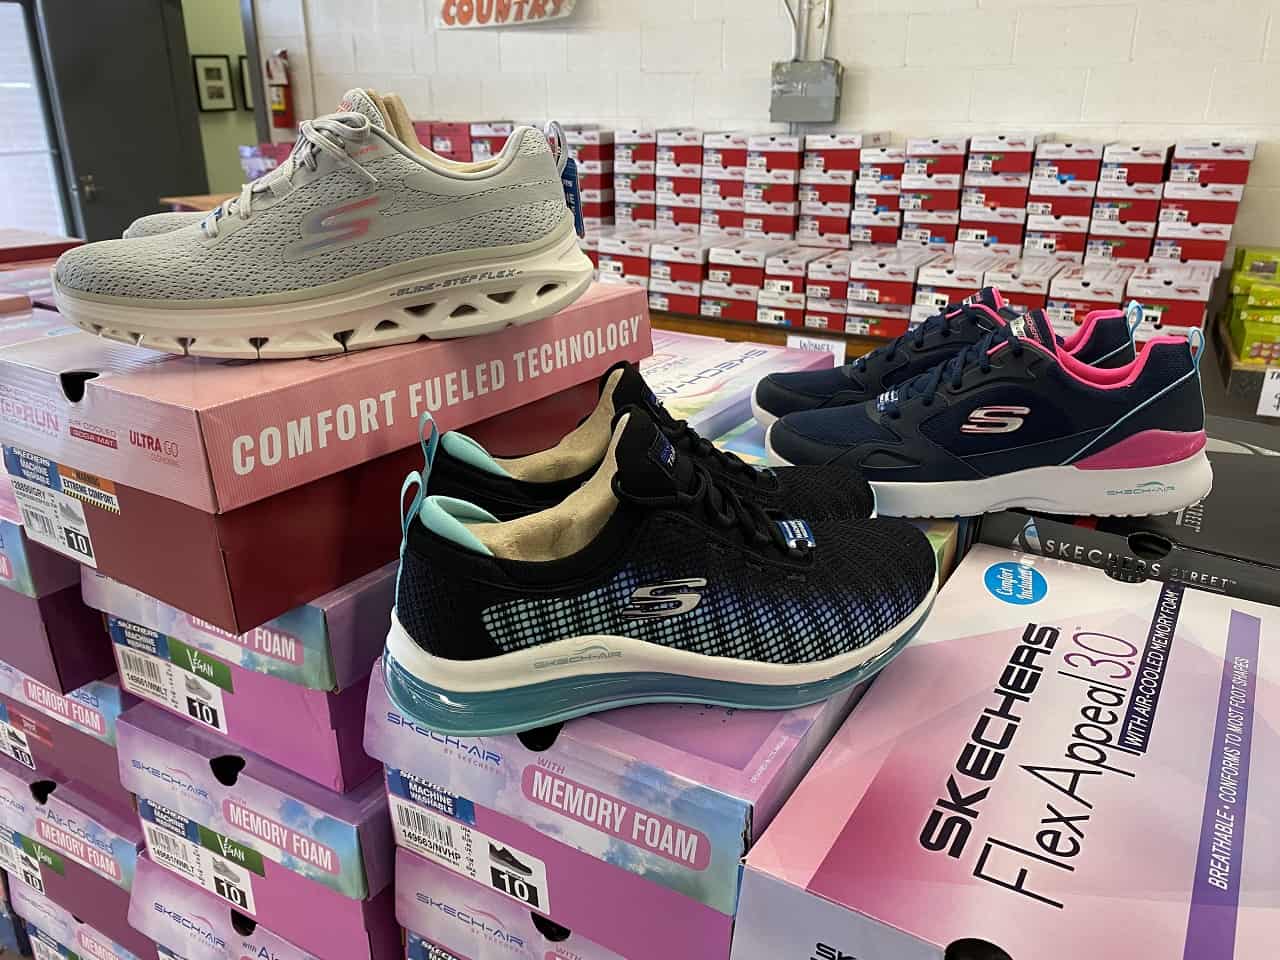 realidad archivo Pulido Massive warehouse sale in Mississauga offers big discounts on Skechers shoes  and footwear | insauga